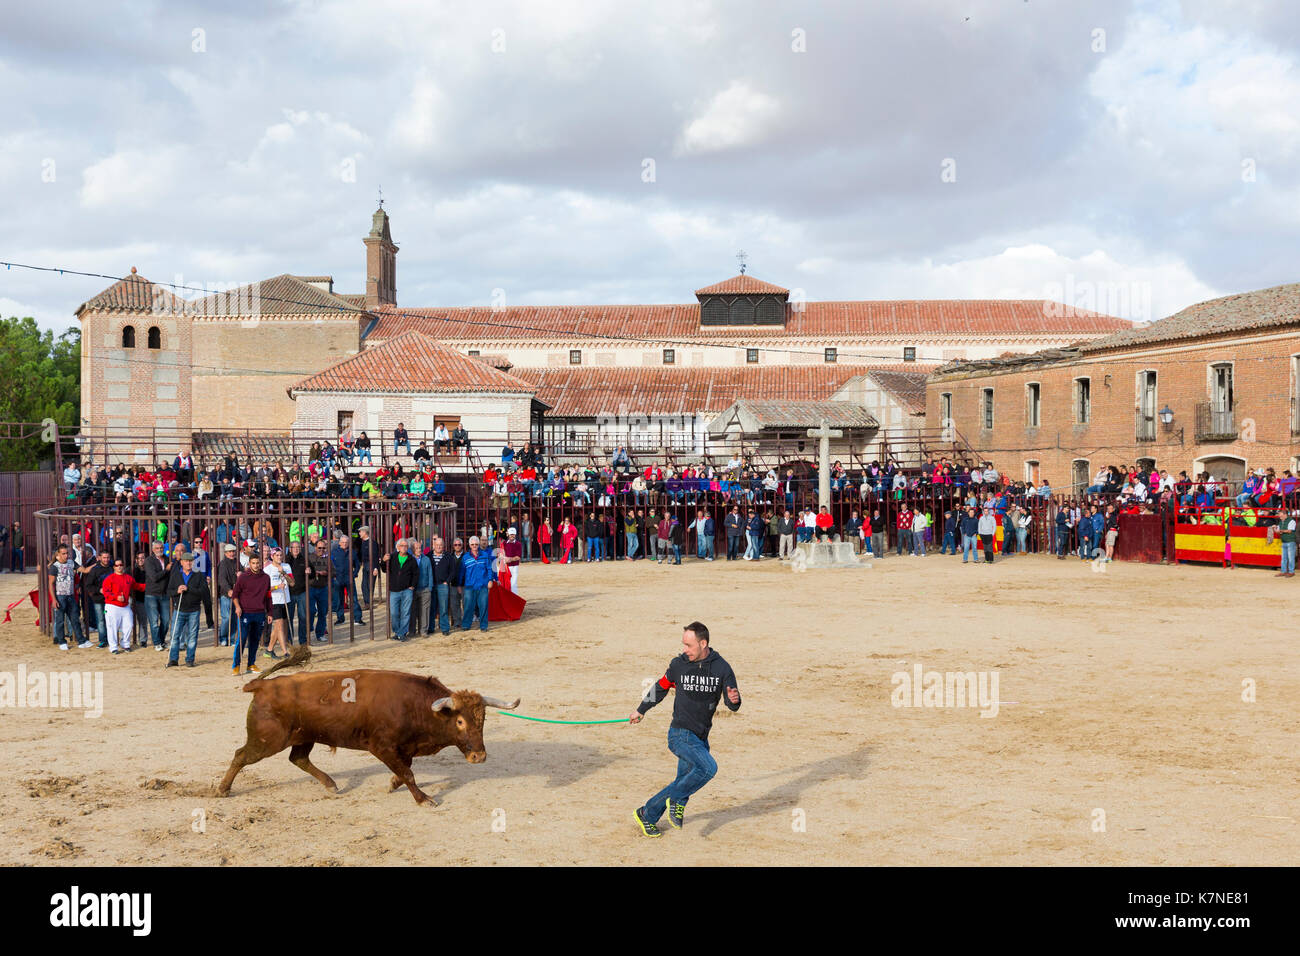 Local people challenging bull during traditional festival at Madrigal de los Altas Torres in province of Avila, Spain Stock Photo